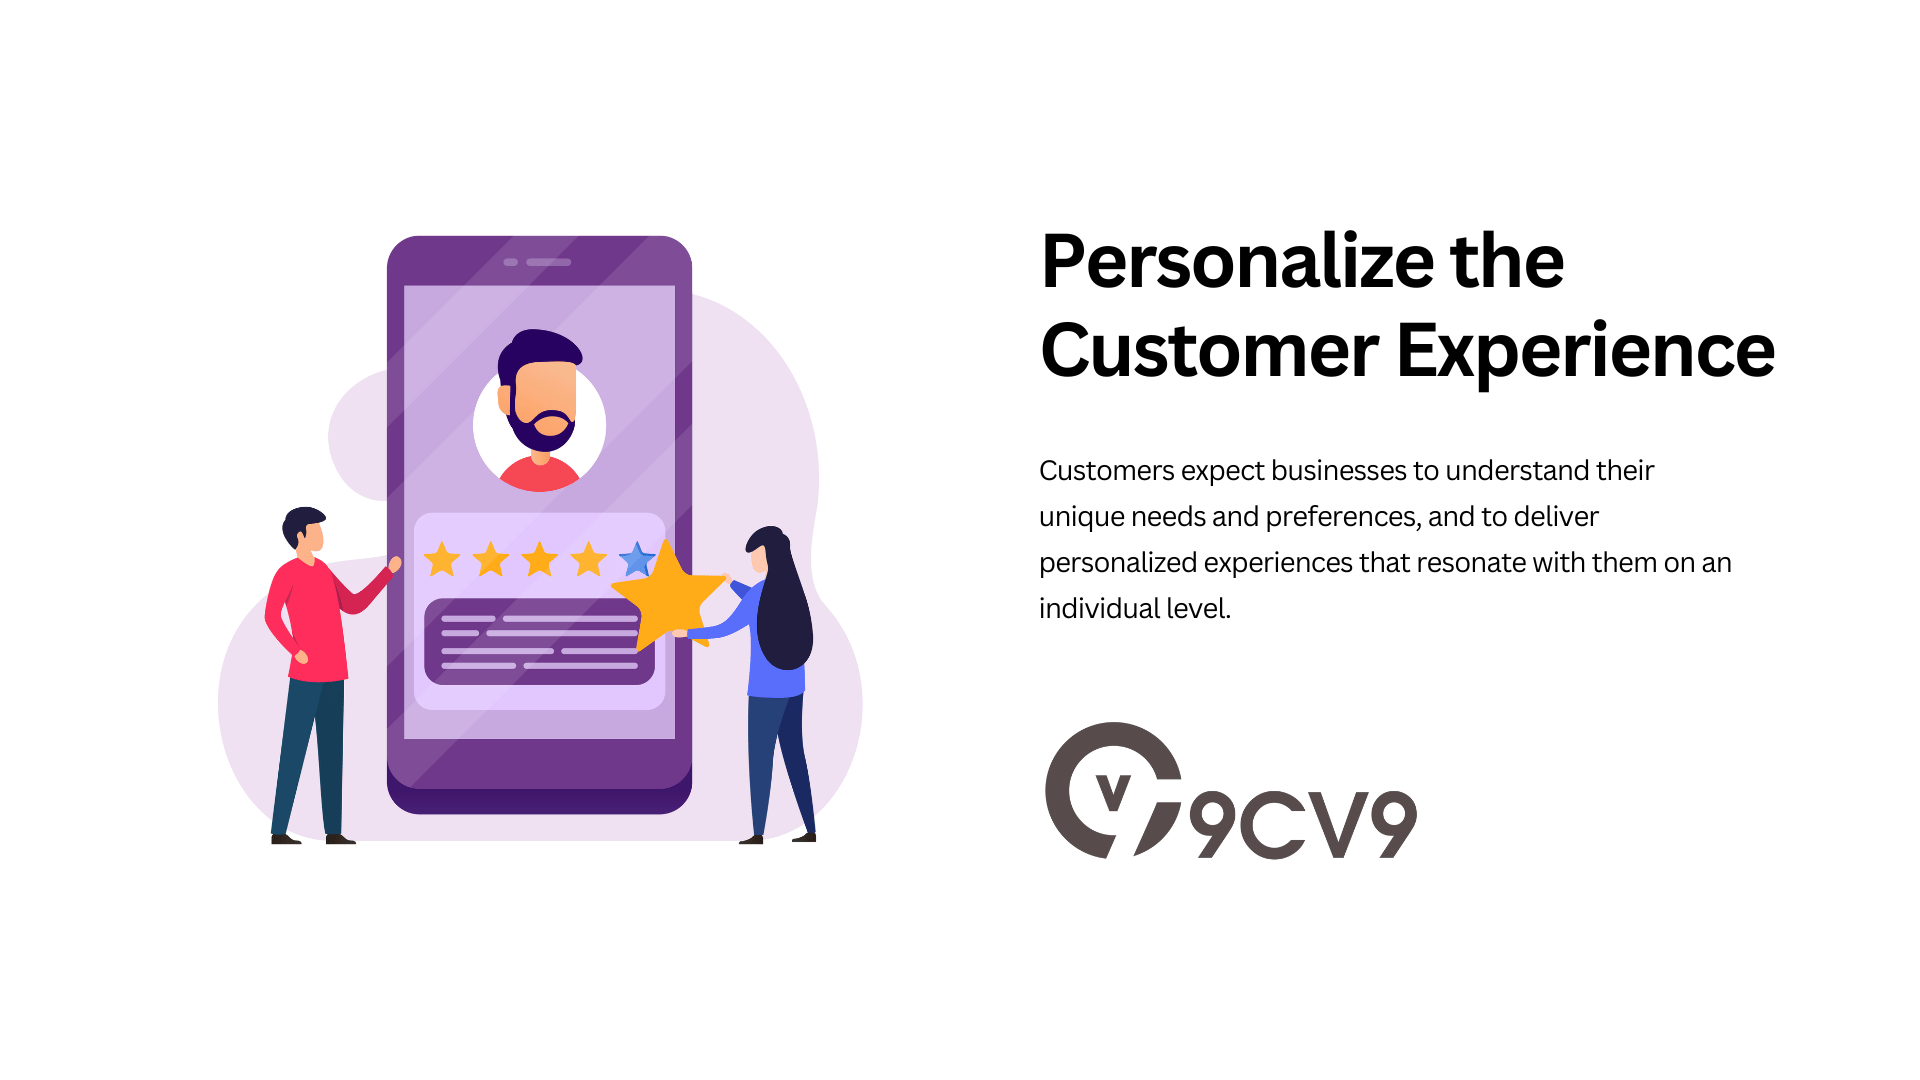 Personalize the Customer Experience